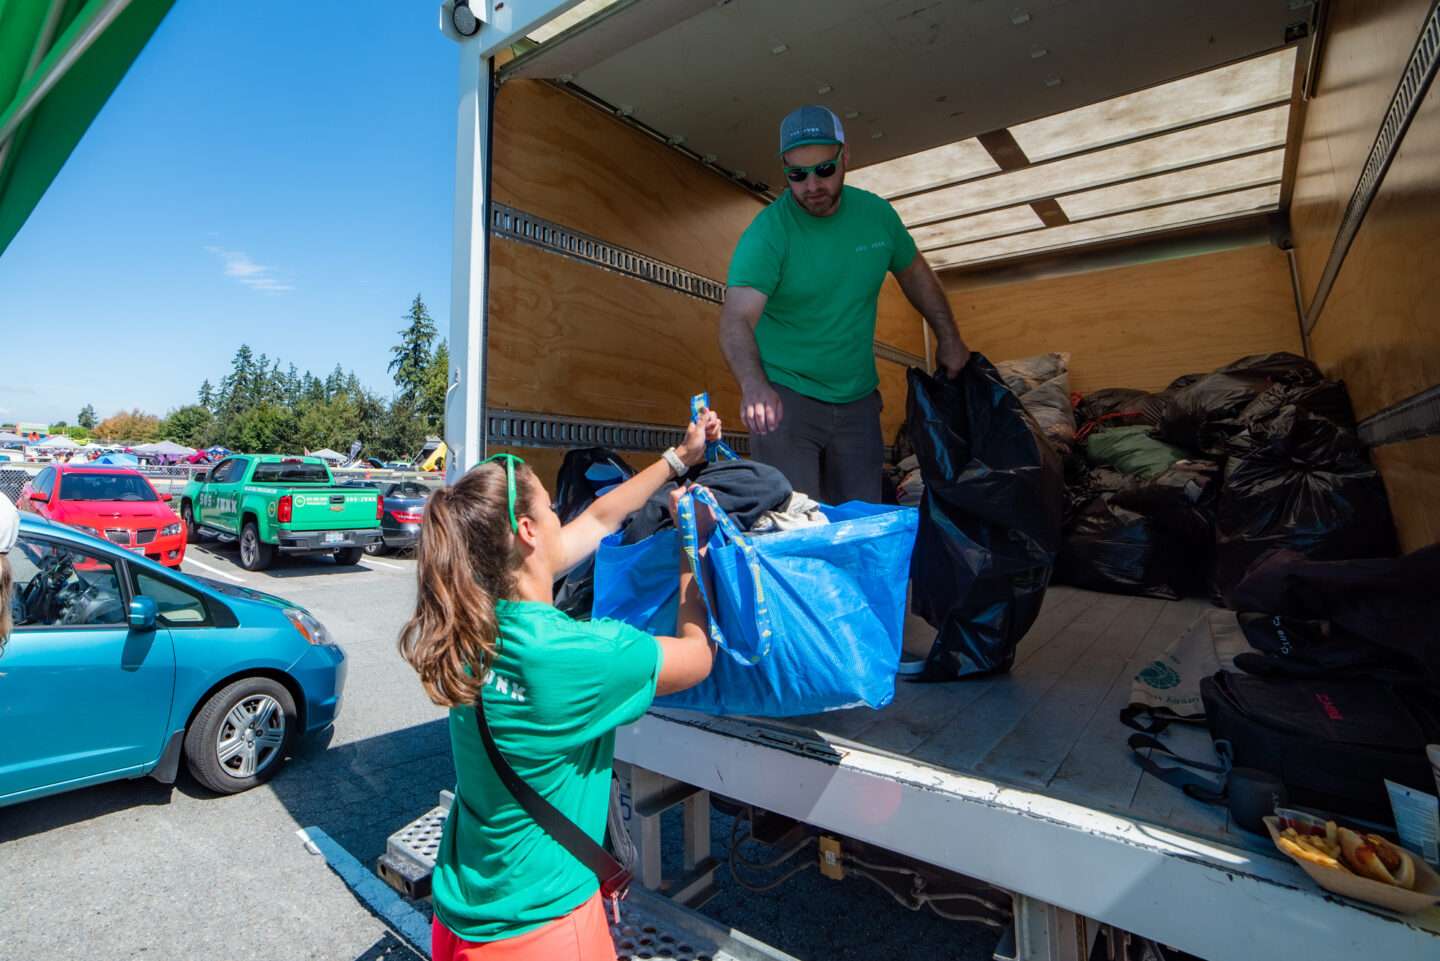 505-Junk employees loading the donation truck with reusable clothing that came from an apartment junk removal pickup. 